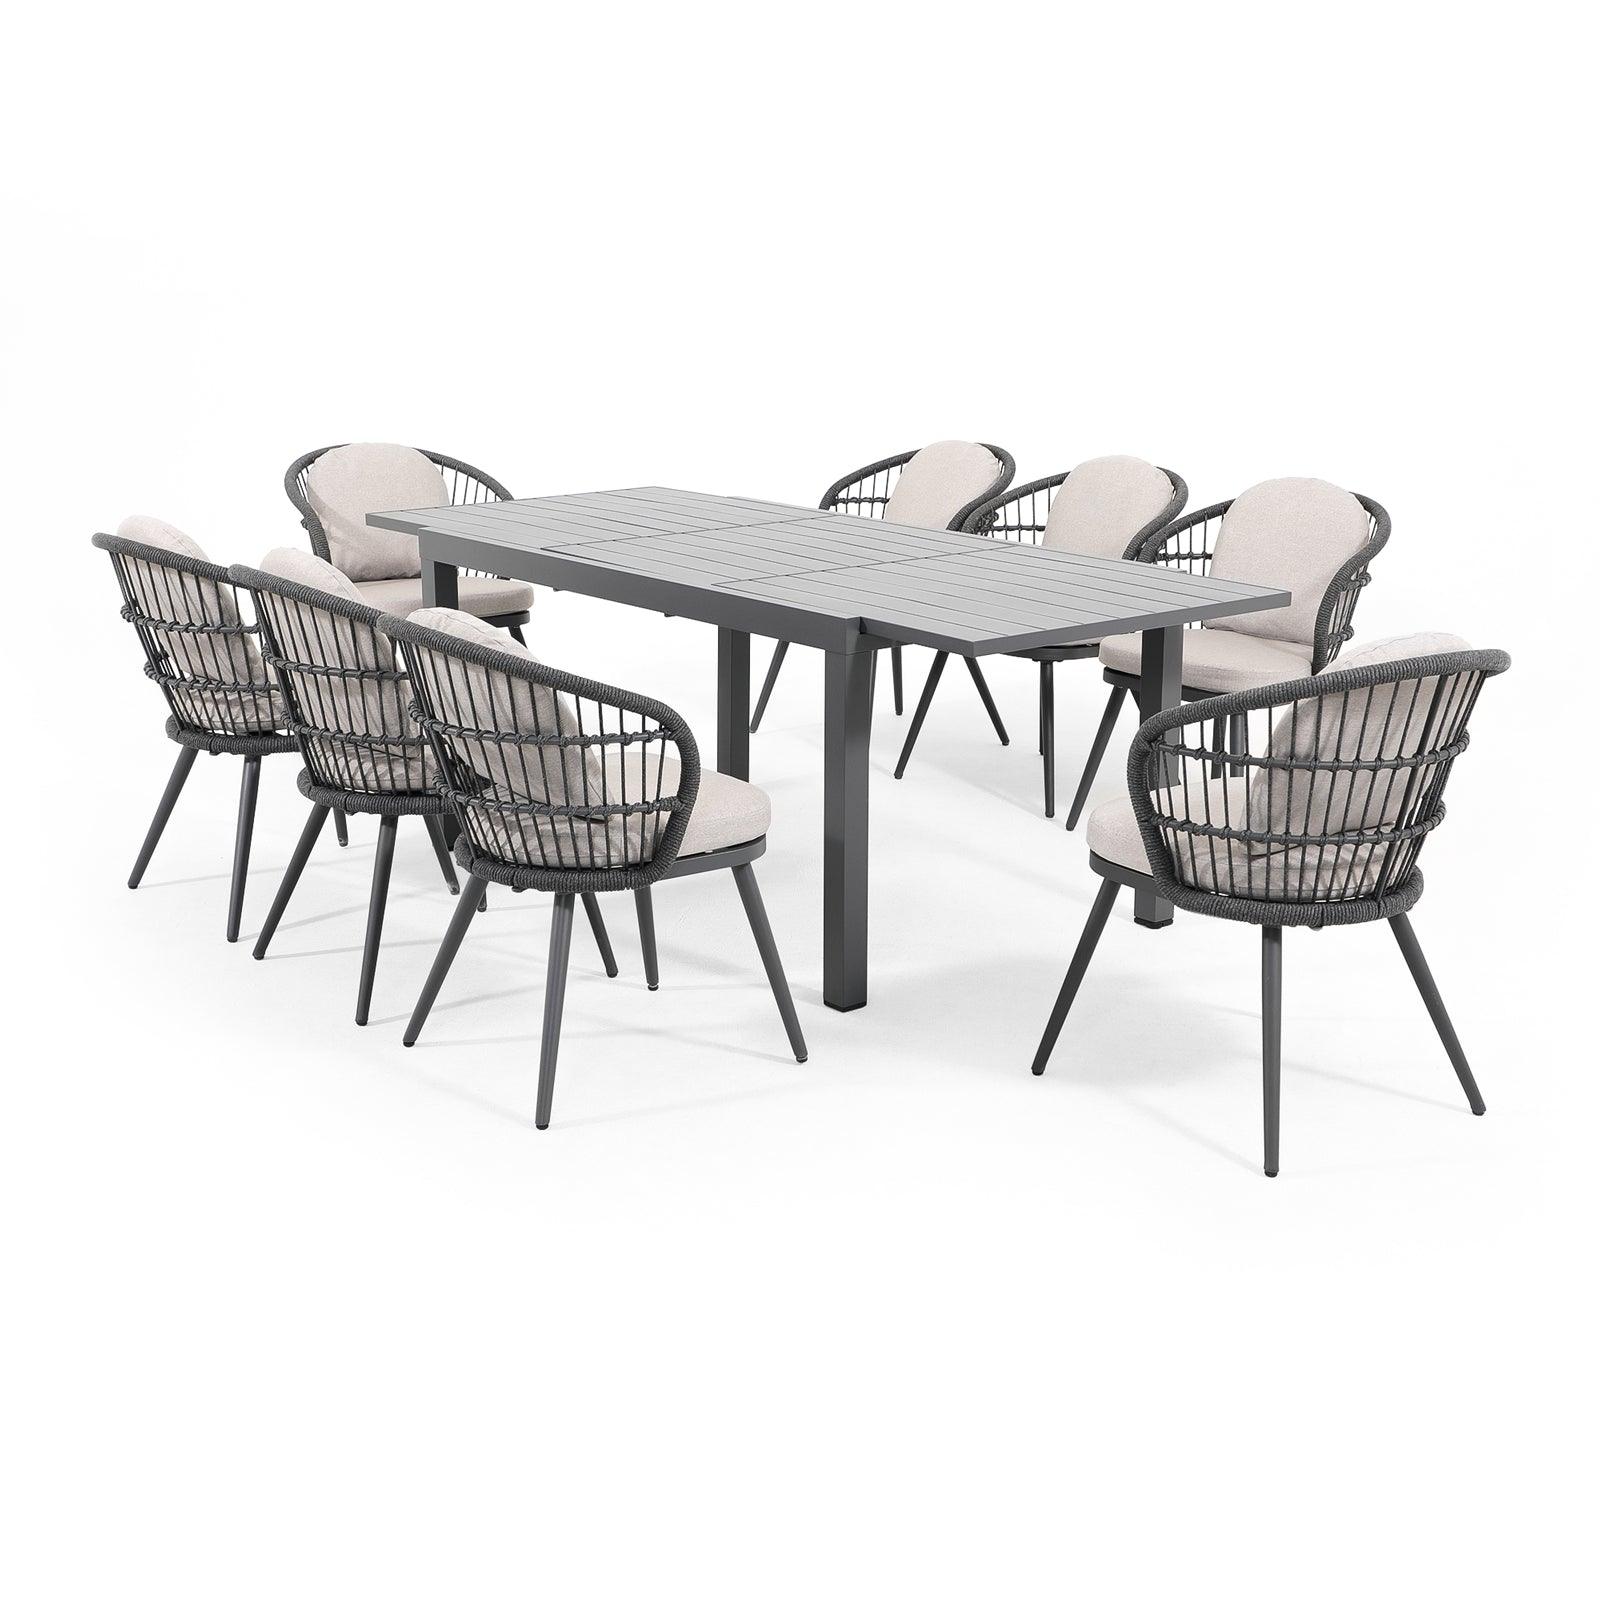 Comino Modern Rope Outdoor Furniture,  dark grey aluminum frame outdoor Dining Set for 8 with light grey cushions, 8 dining seats with backrest rope design, 1 extendable rectangle aluminum dining table - Jardina Furniture